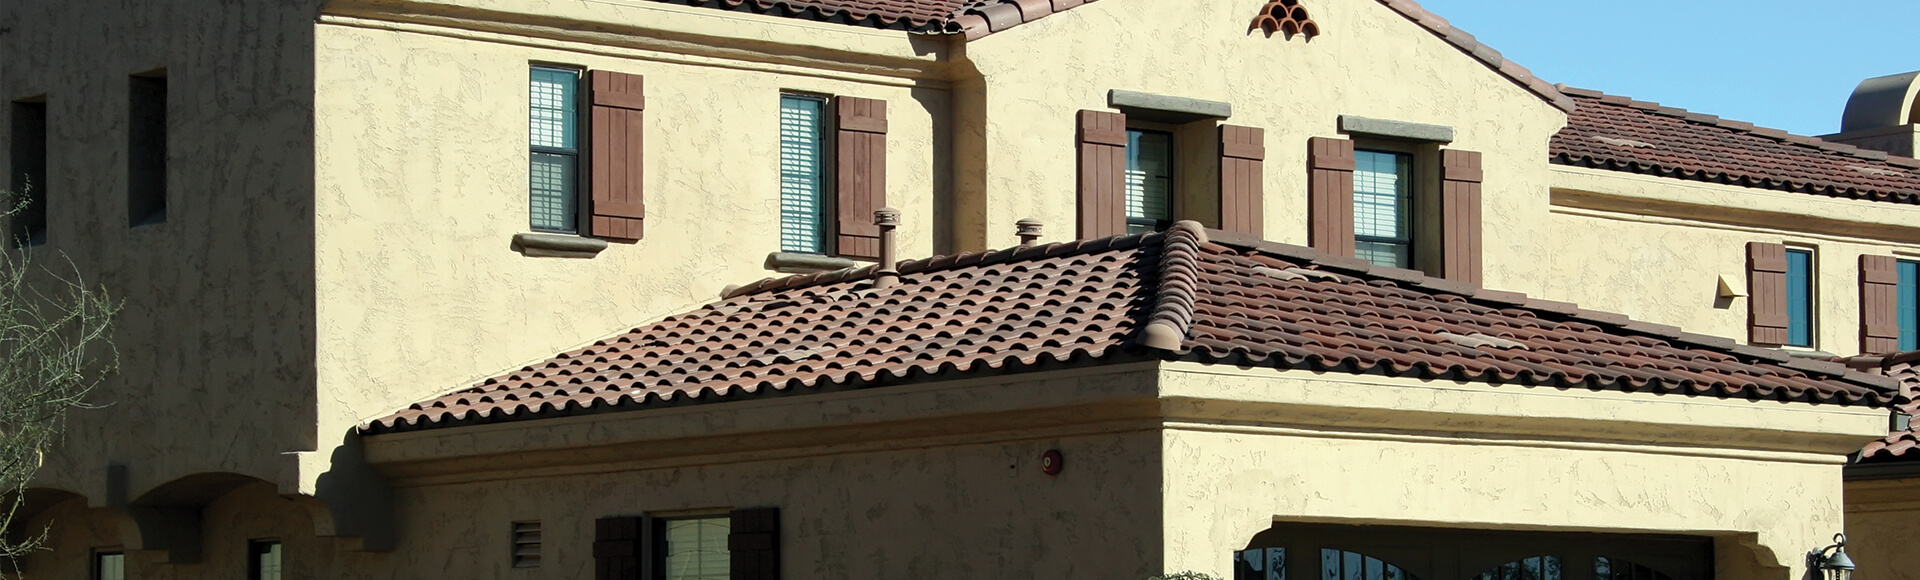 %Roofs and Gutters